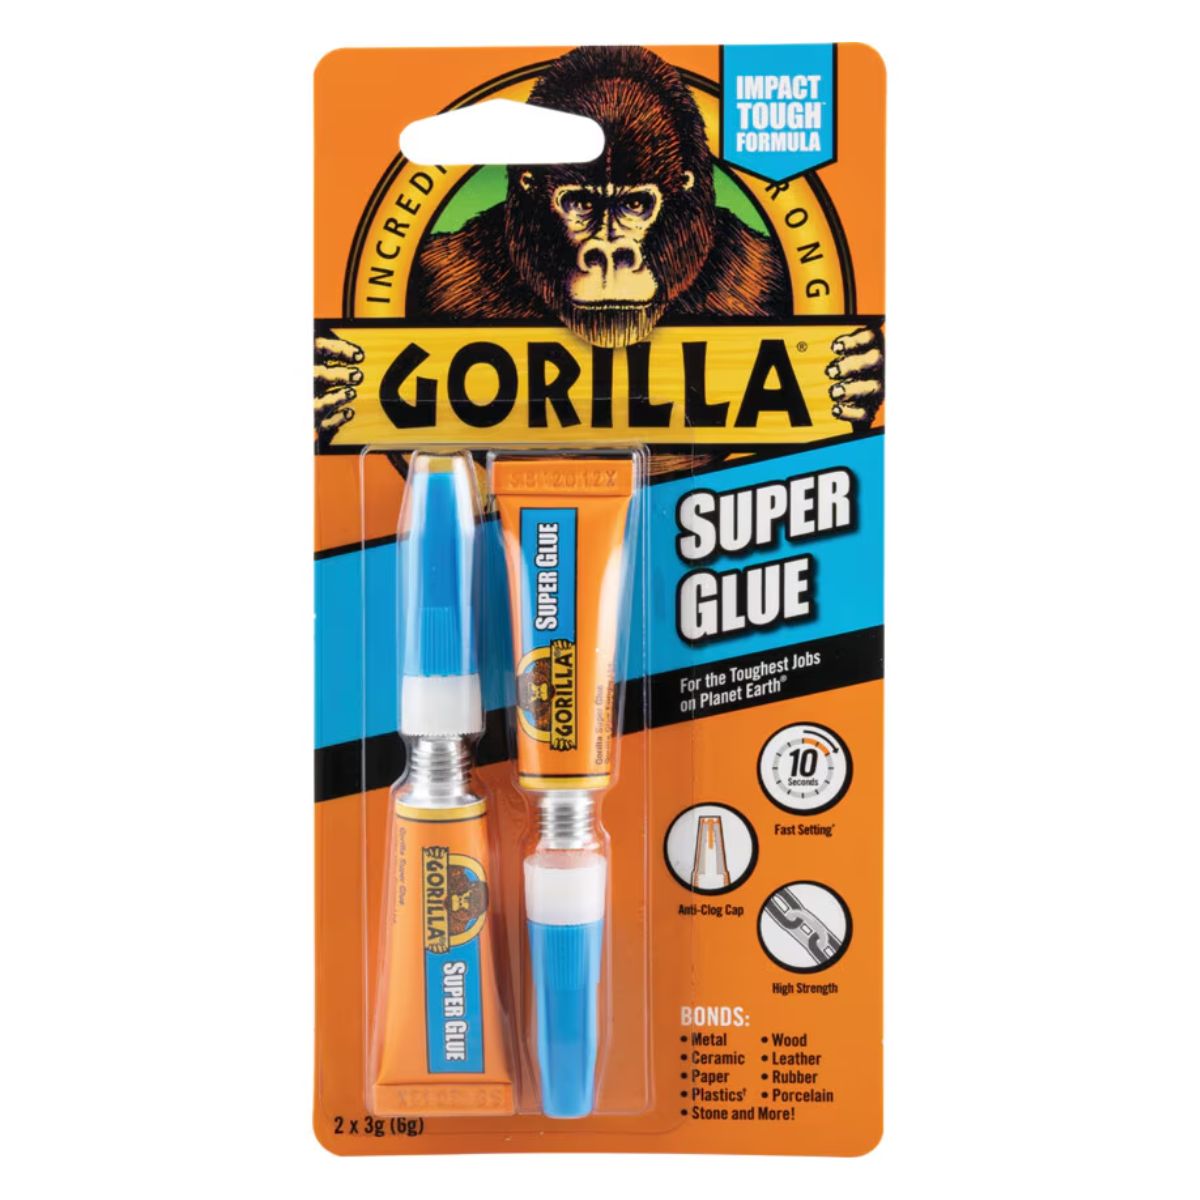 Packaging of Gorilla - Two Pack Superglue - 3g with two tubes displayed.